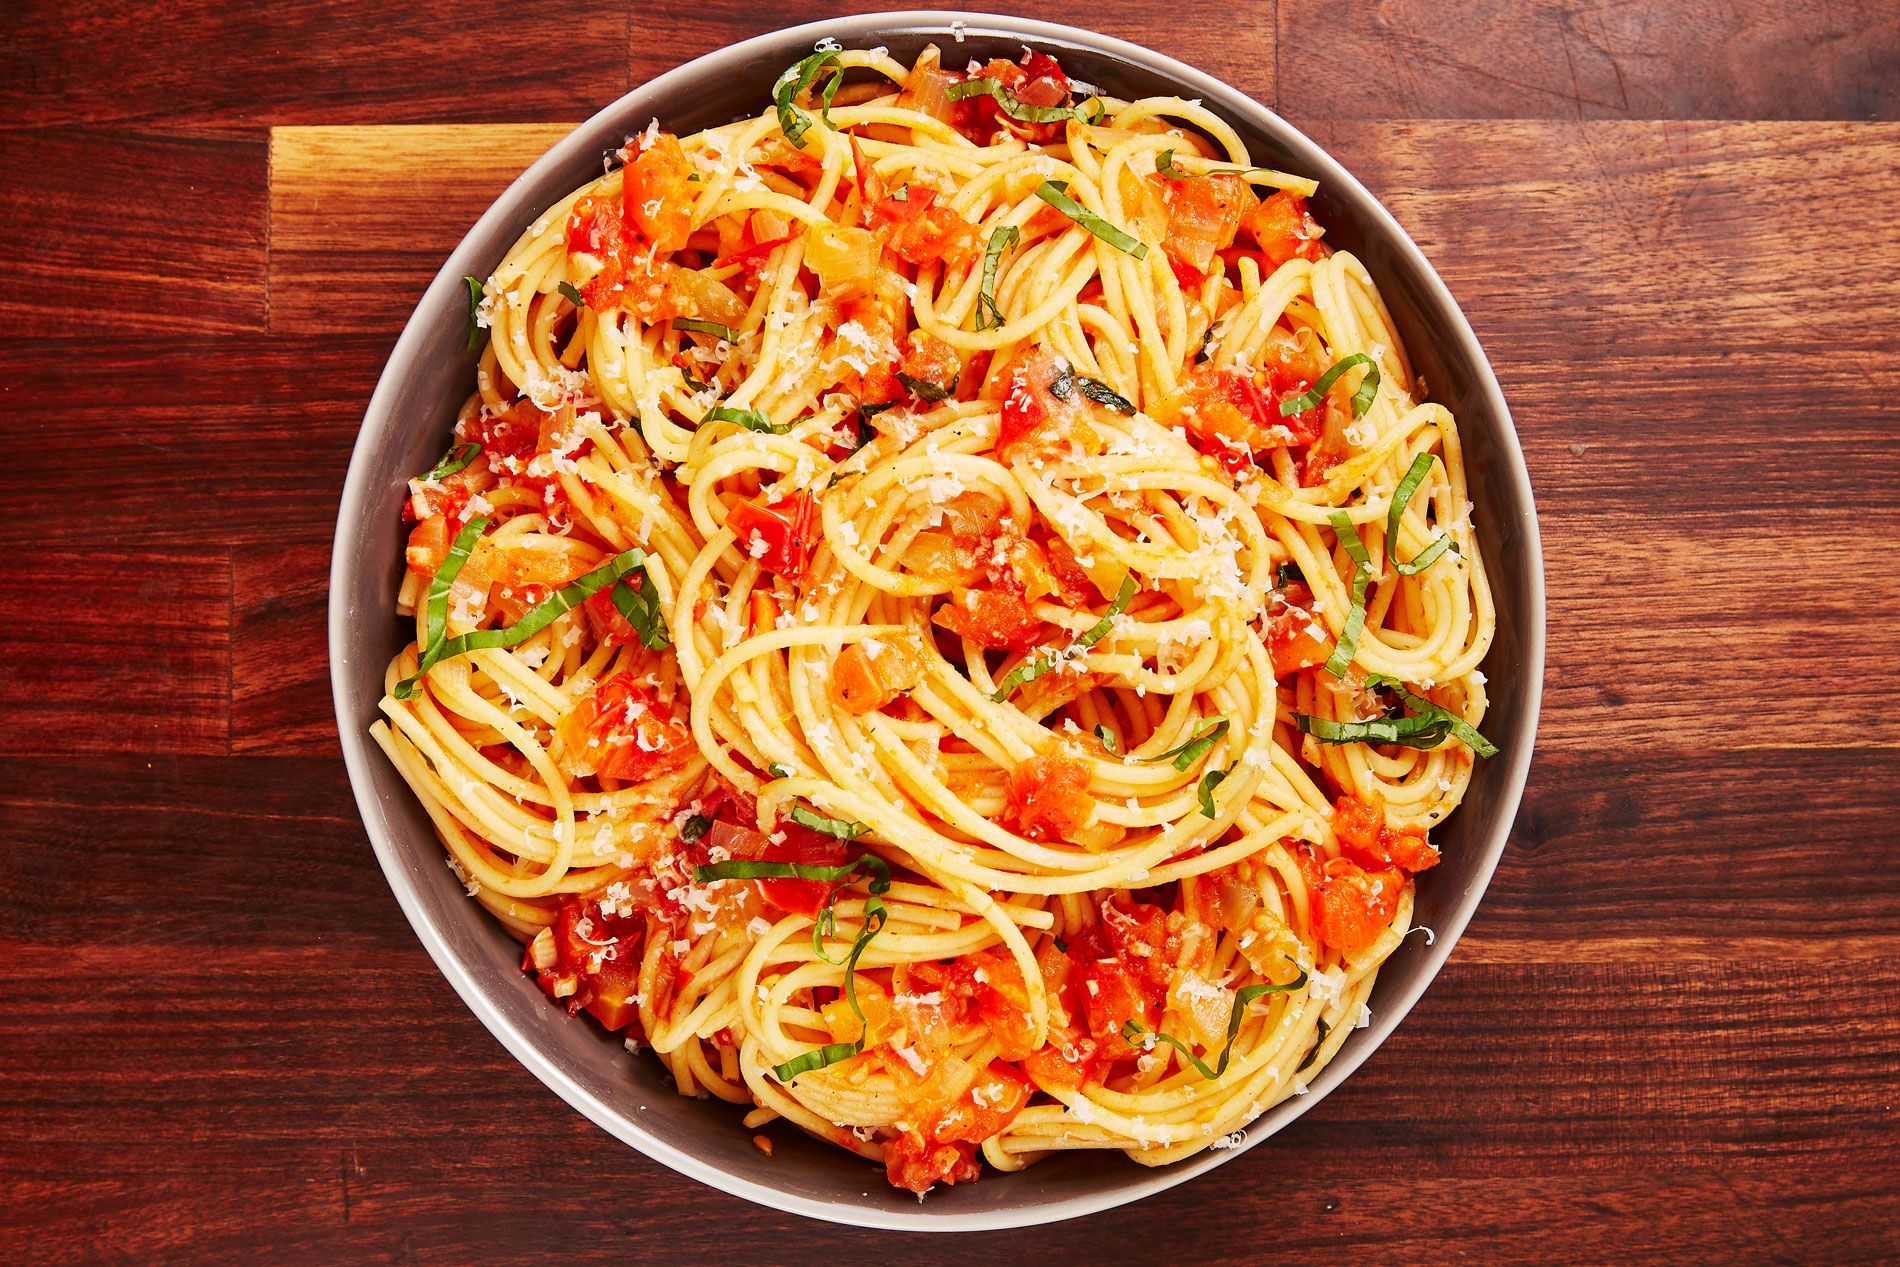 PASTA POMODORO: AN EASY AND QUICK PASTA MEAL